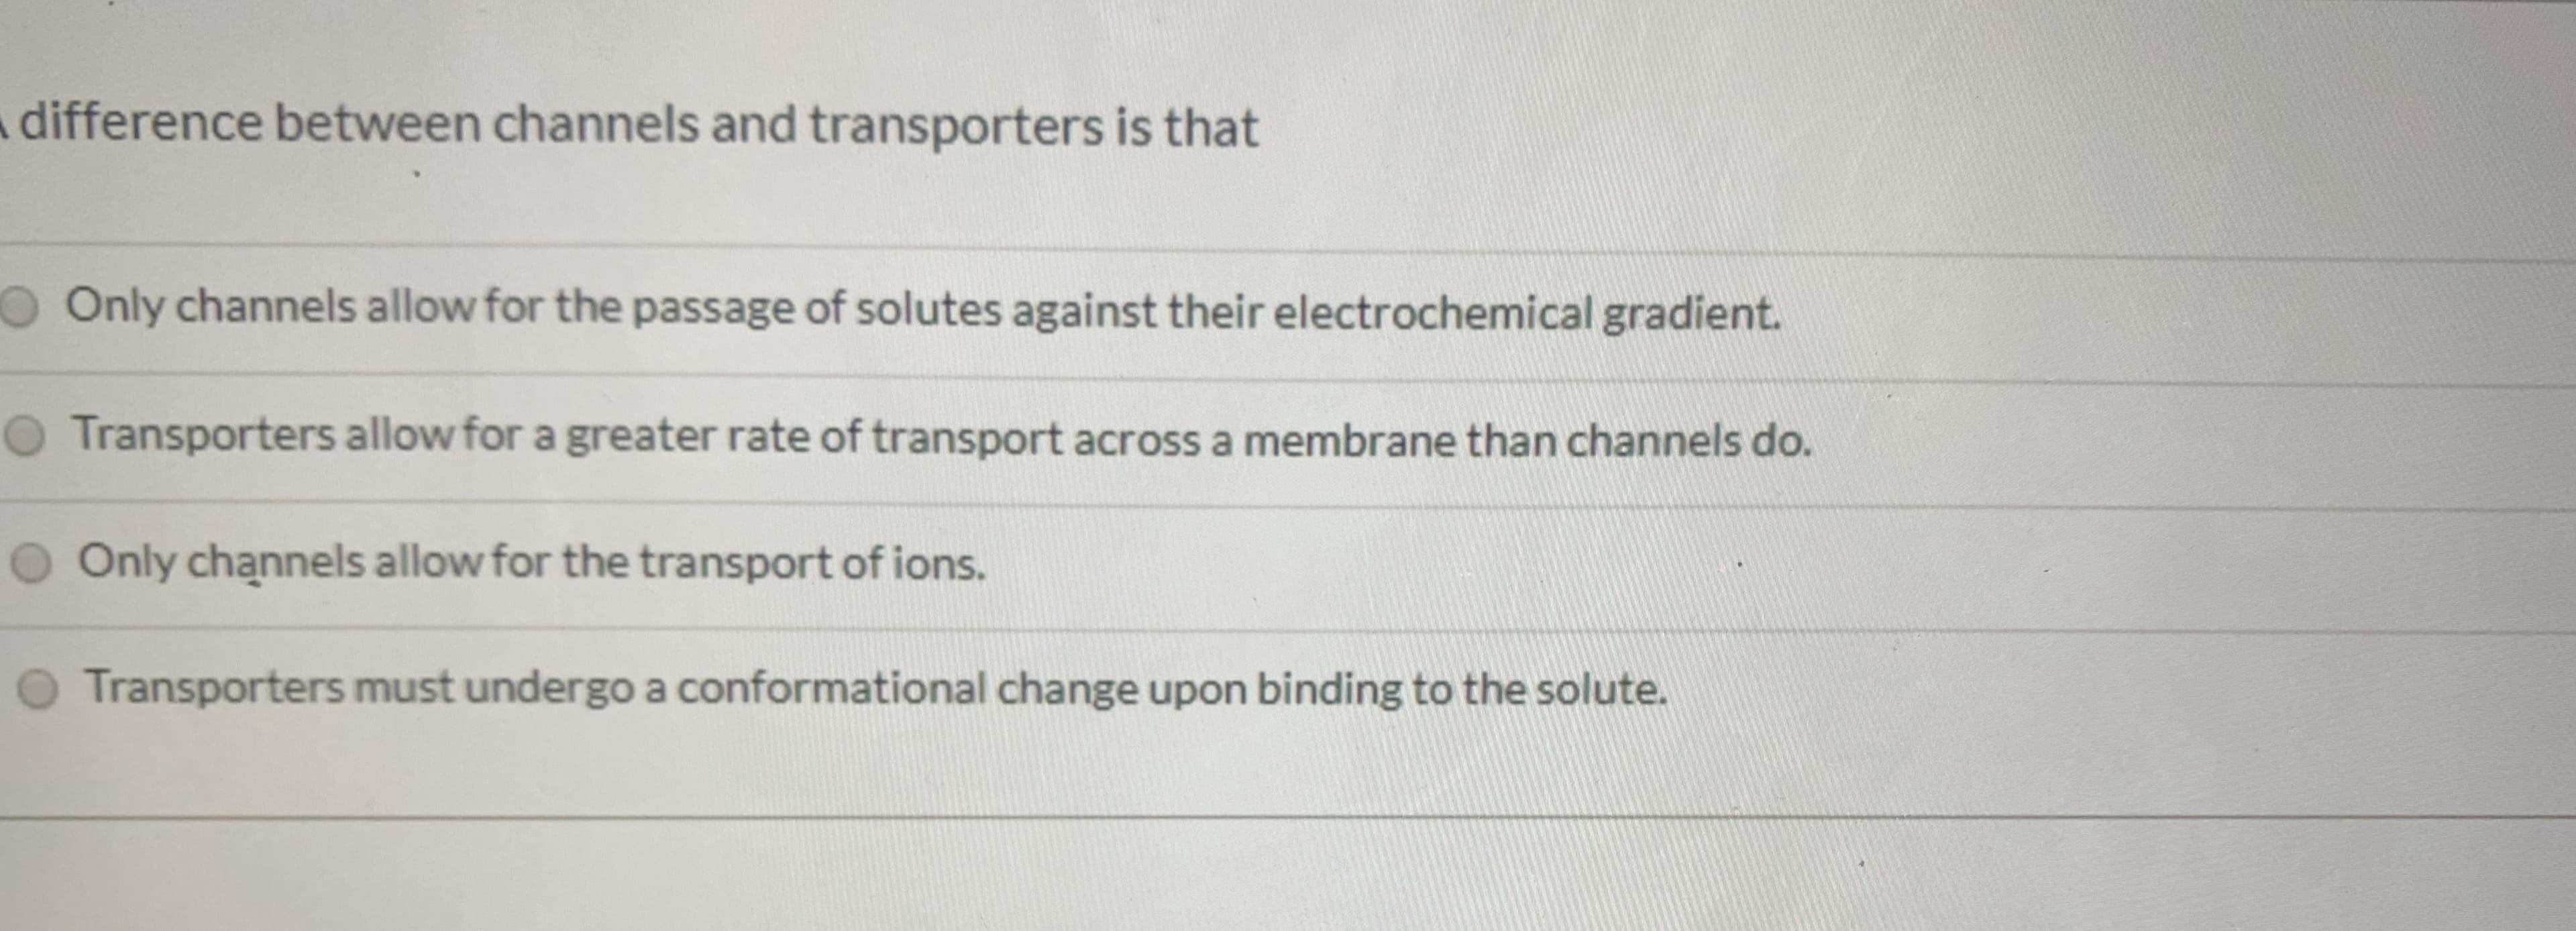 difference between channels and transporters is that
O Only channels allow for the passage of solutes against their electrochemical gradient.
OTransporters allow for a greater rate of transport across a membrane than channels do.
O Only channels allow for the transport of ions.
Transporters must undergo a conformational change upon binding to the solute.
